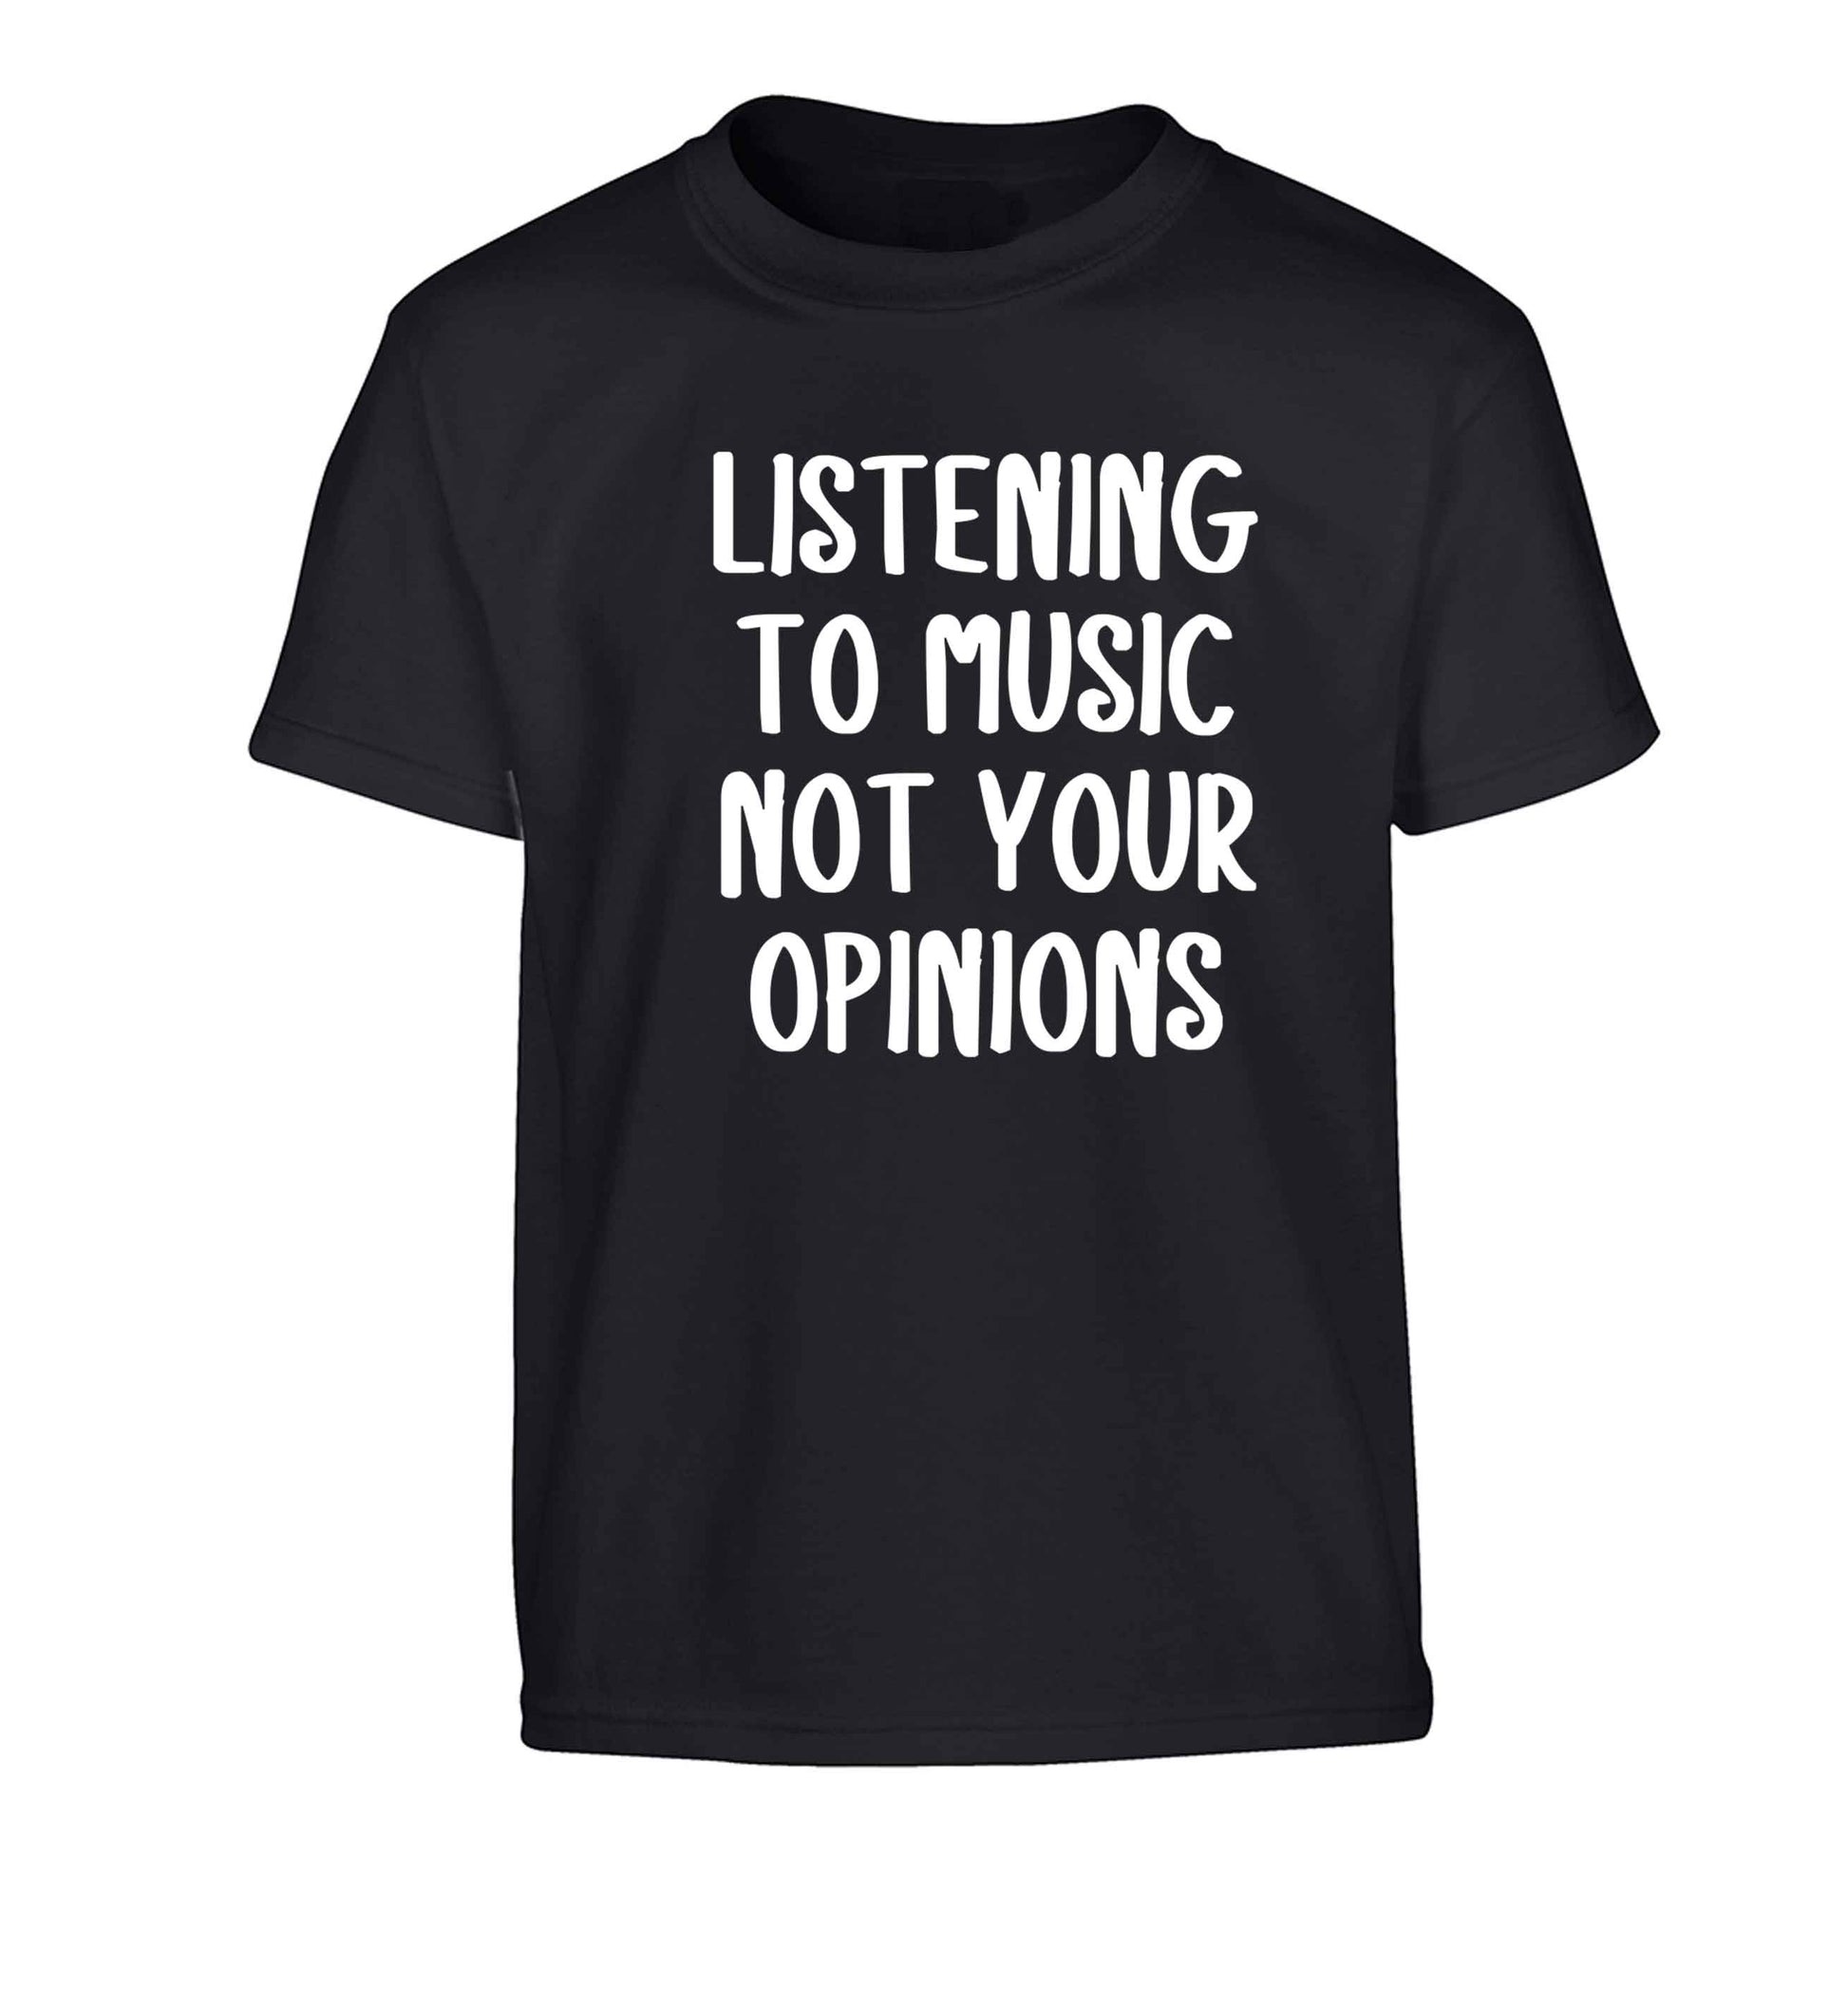 Listening to music not your opinions Children's black Tshirt 12-13 Years